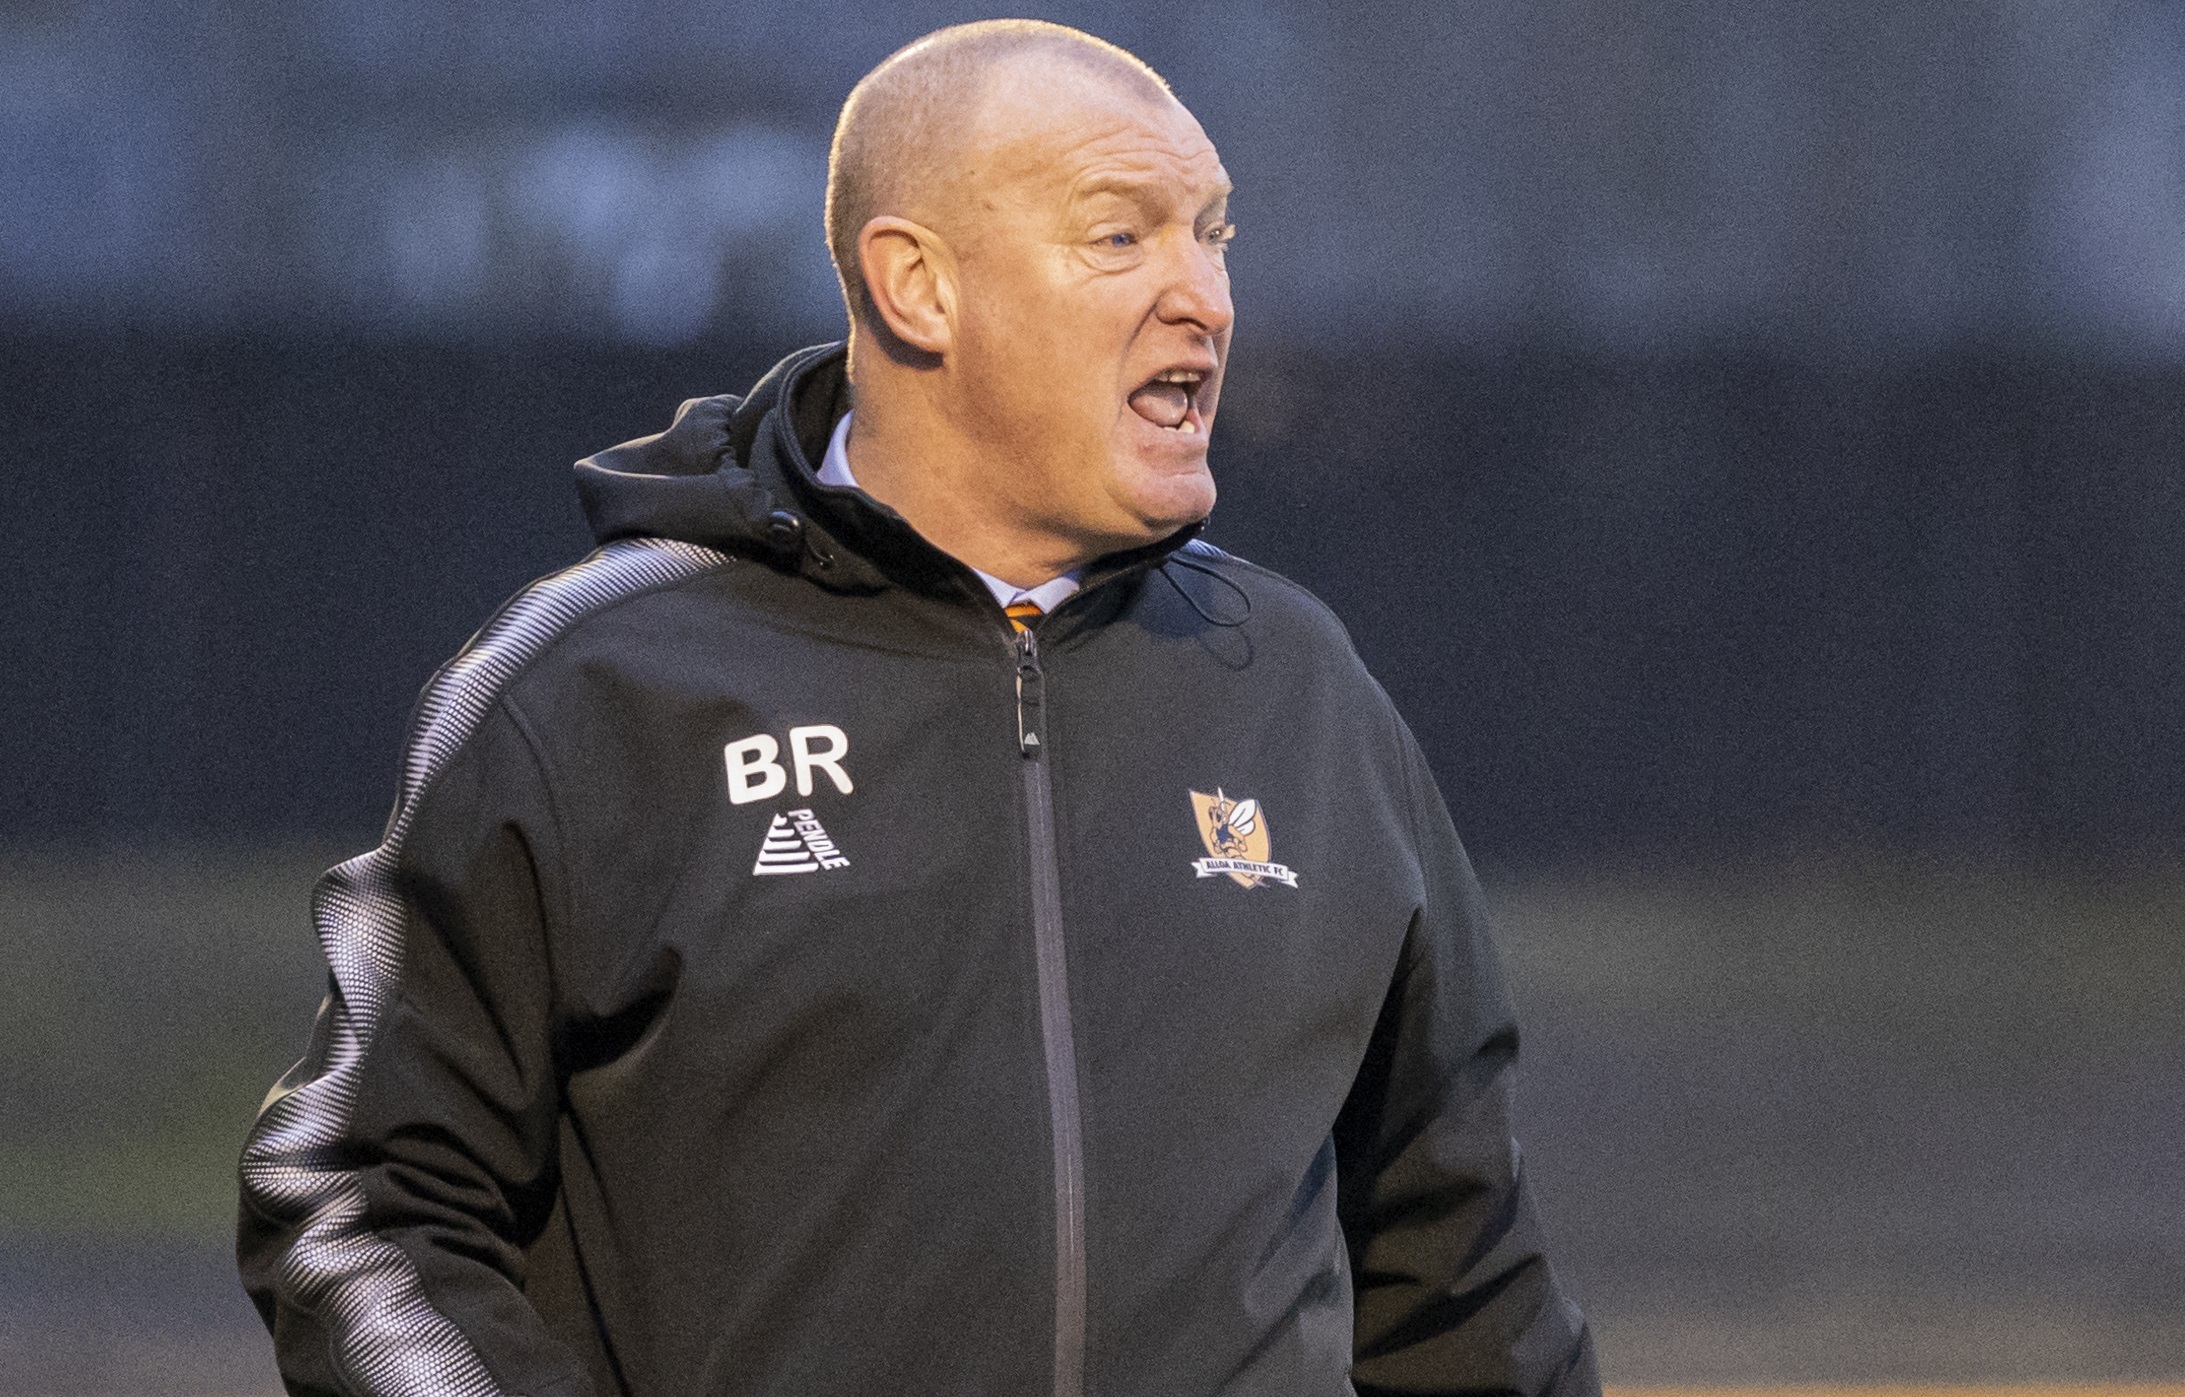 Alloa 0-2 Dunfermline: Wasps to face Hamilton in playoffs